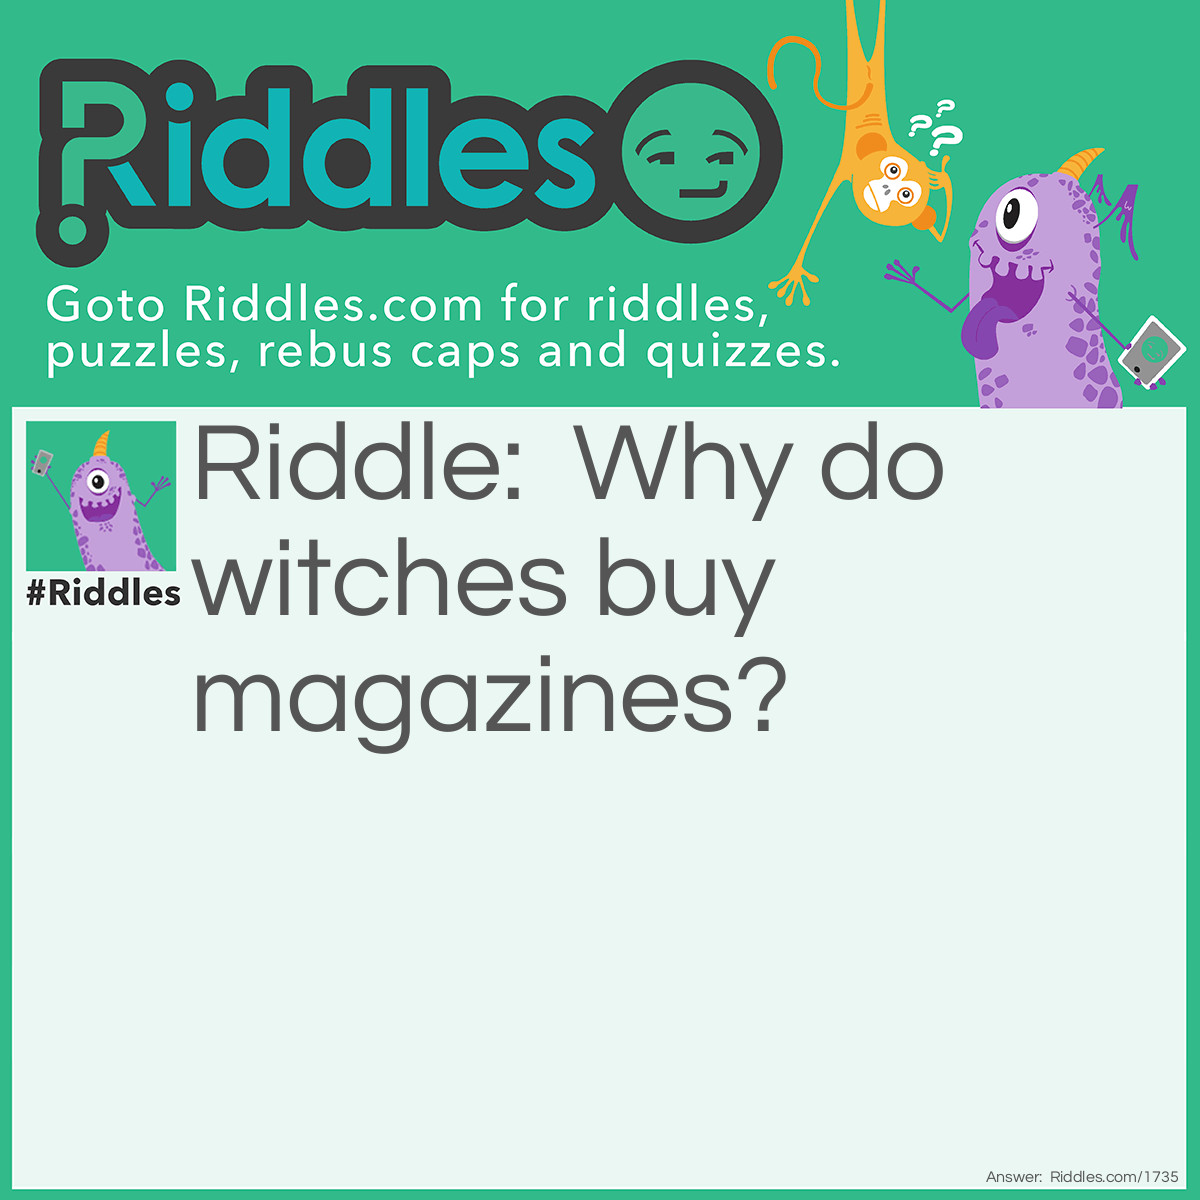 Riddle: Why do witches buy magazines? Answer: They like to read the horrorscopes.